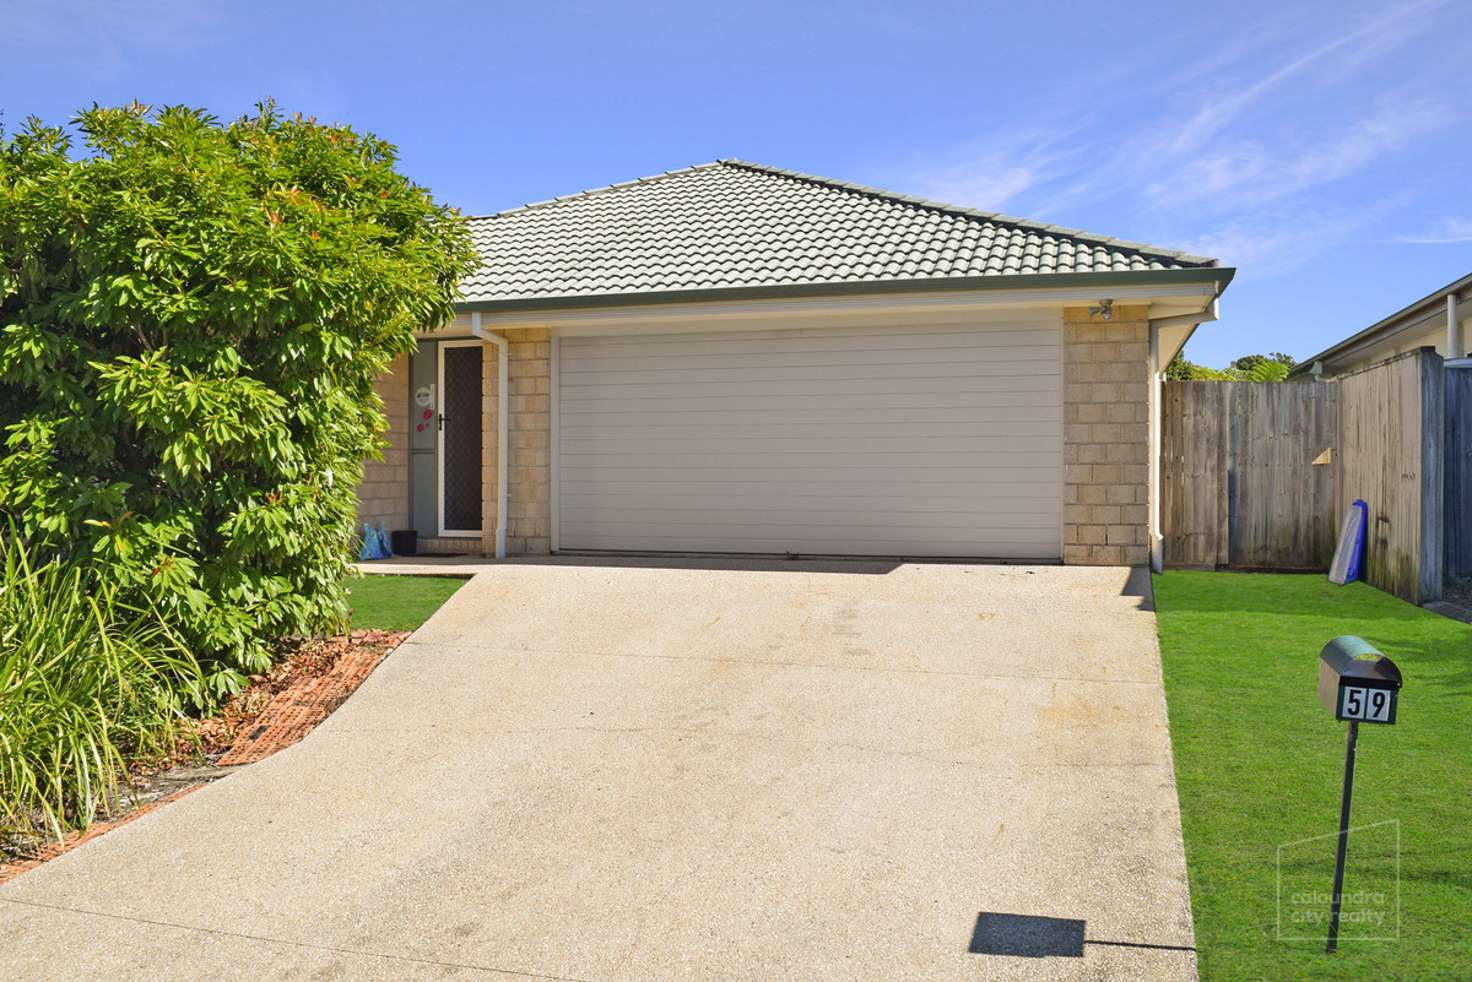 Main view of Homely house listing, 59 Rawson Street, Caloundra West QLD 4551